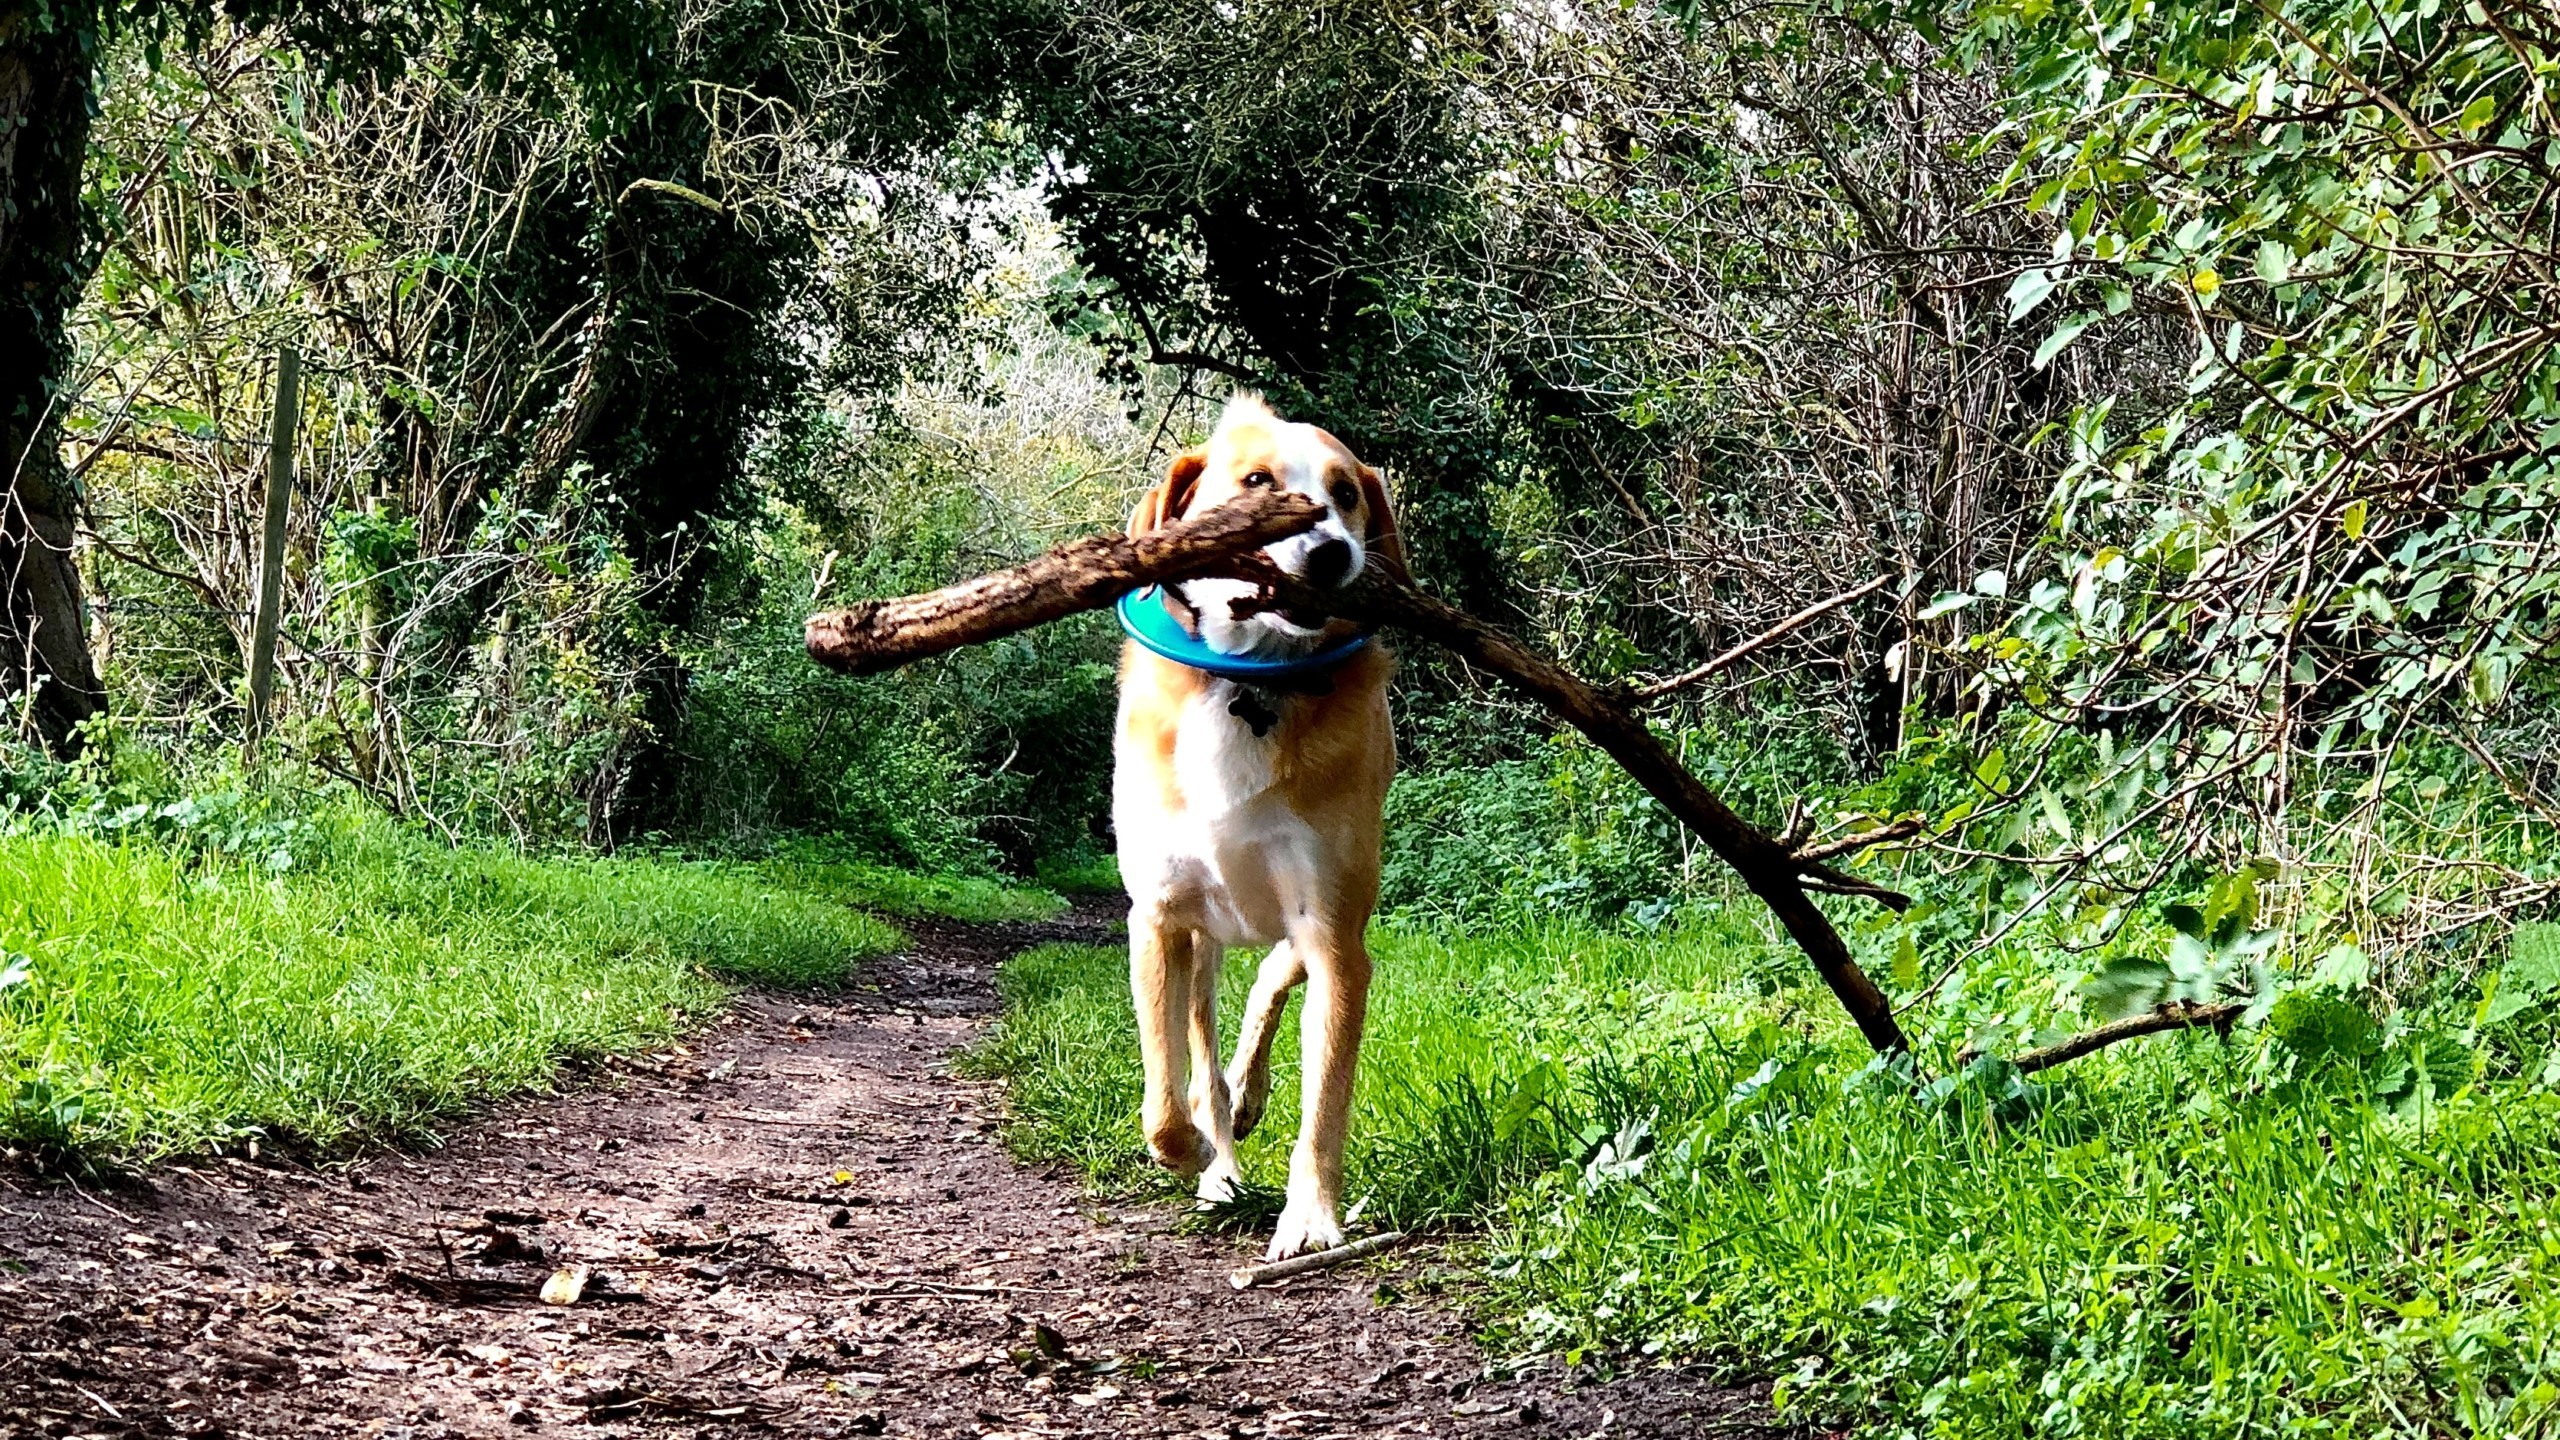 Dog carrying large branch in mouth on trail